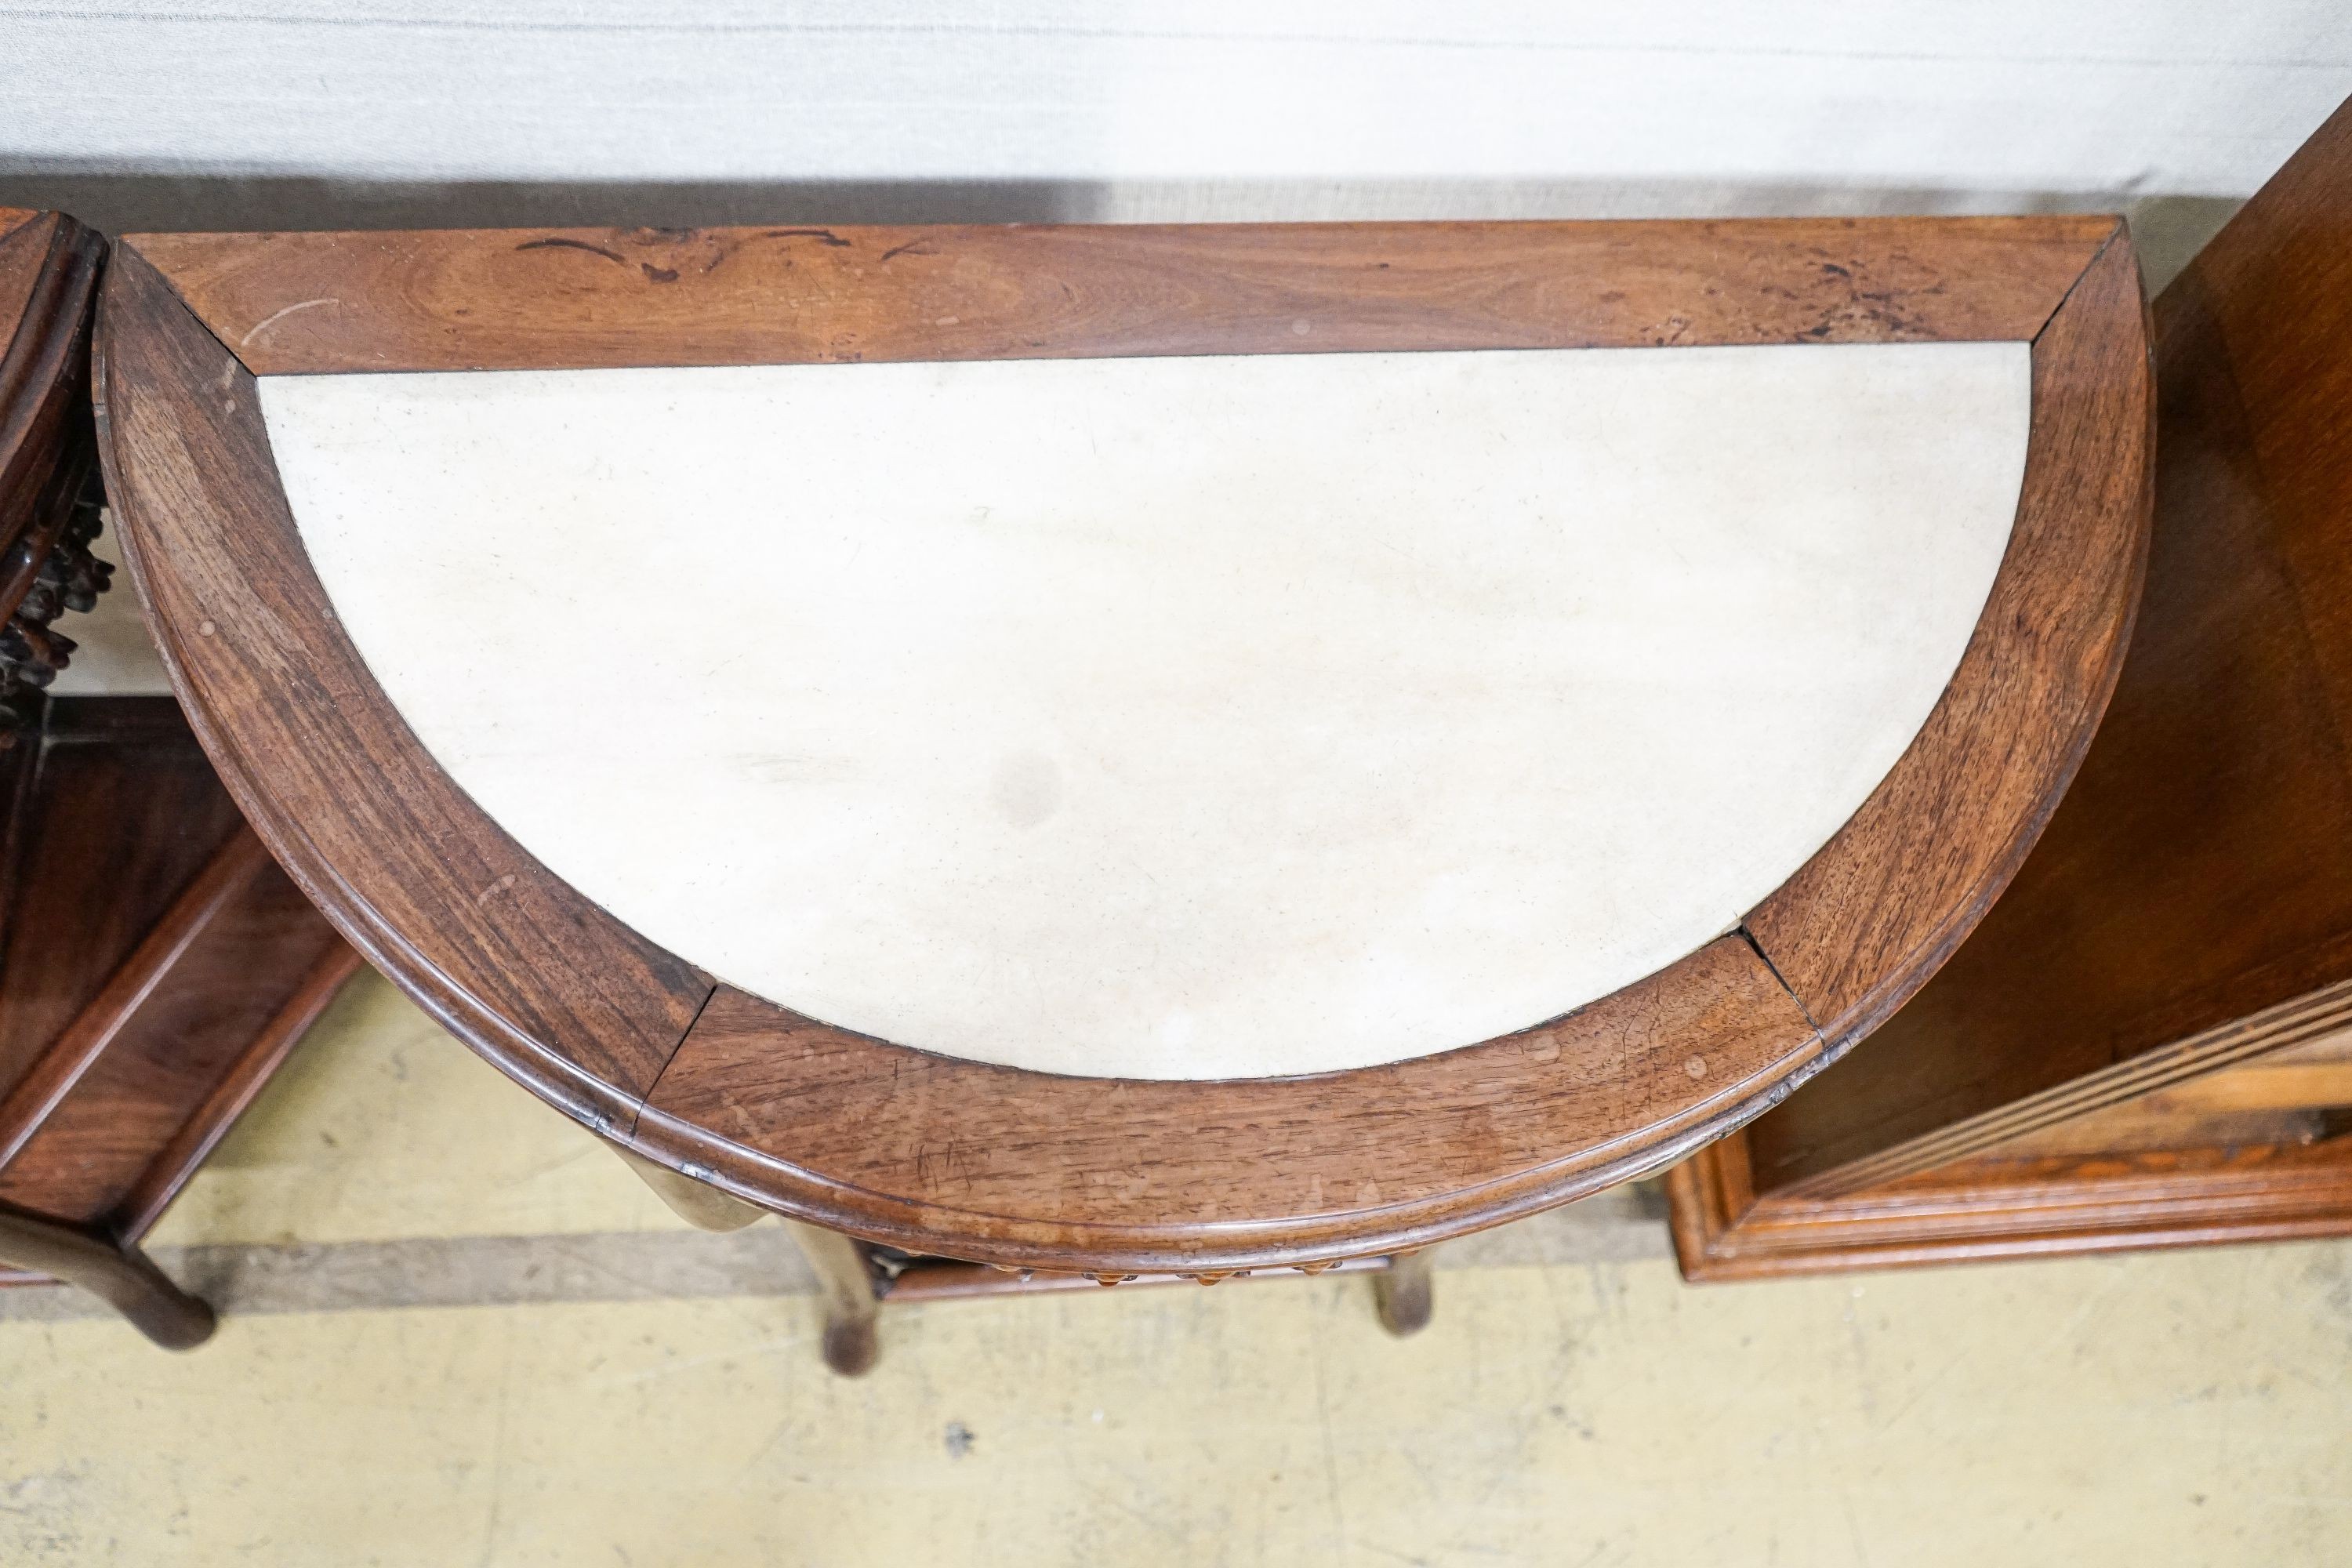 A pair of Chinese marble-topped demi lune console tables, width 82cm, depth 40cm, height 80cm